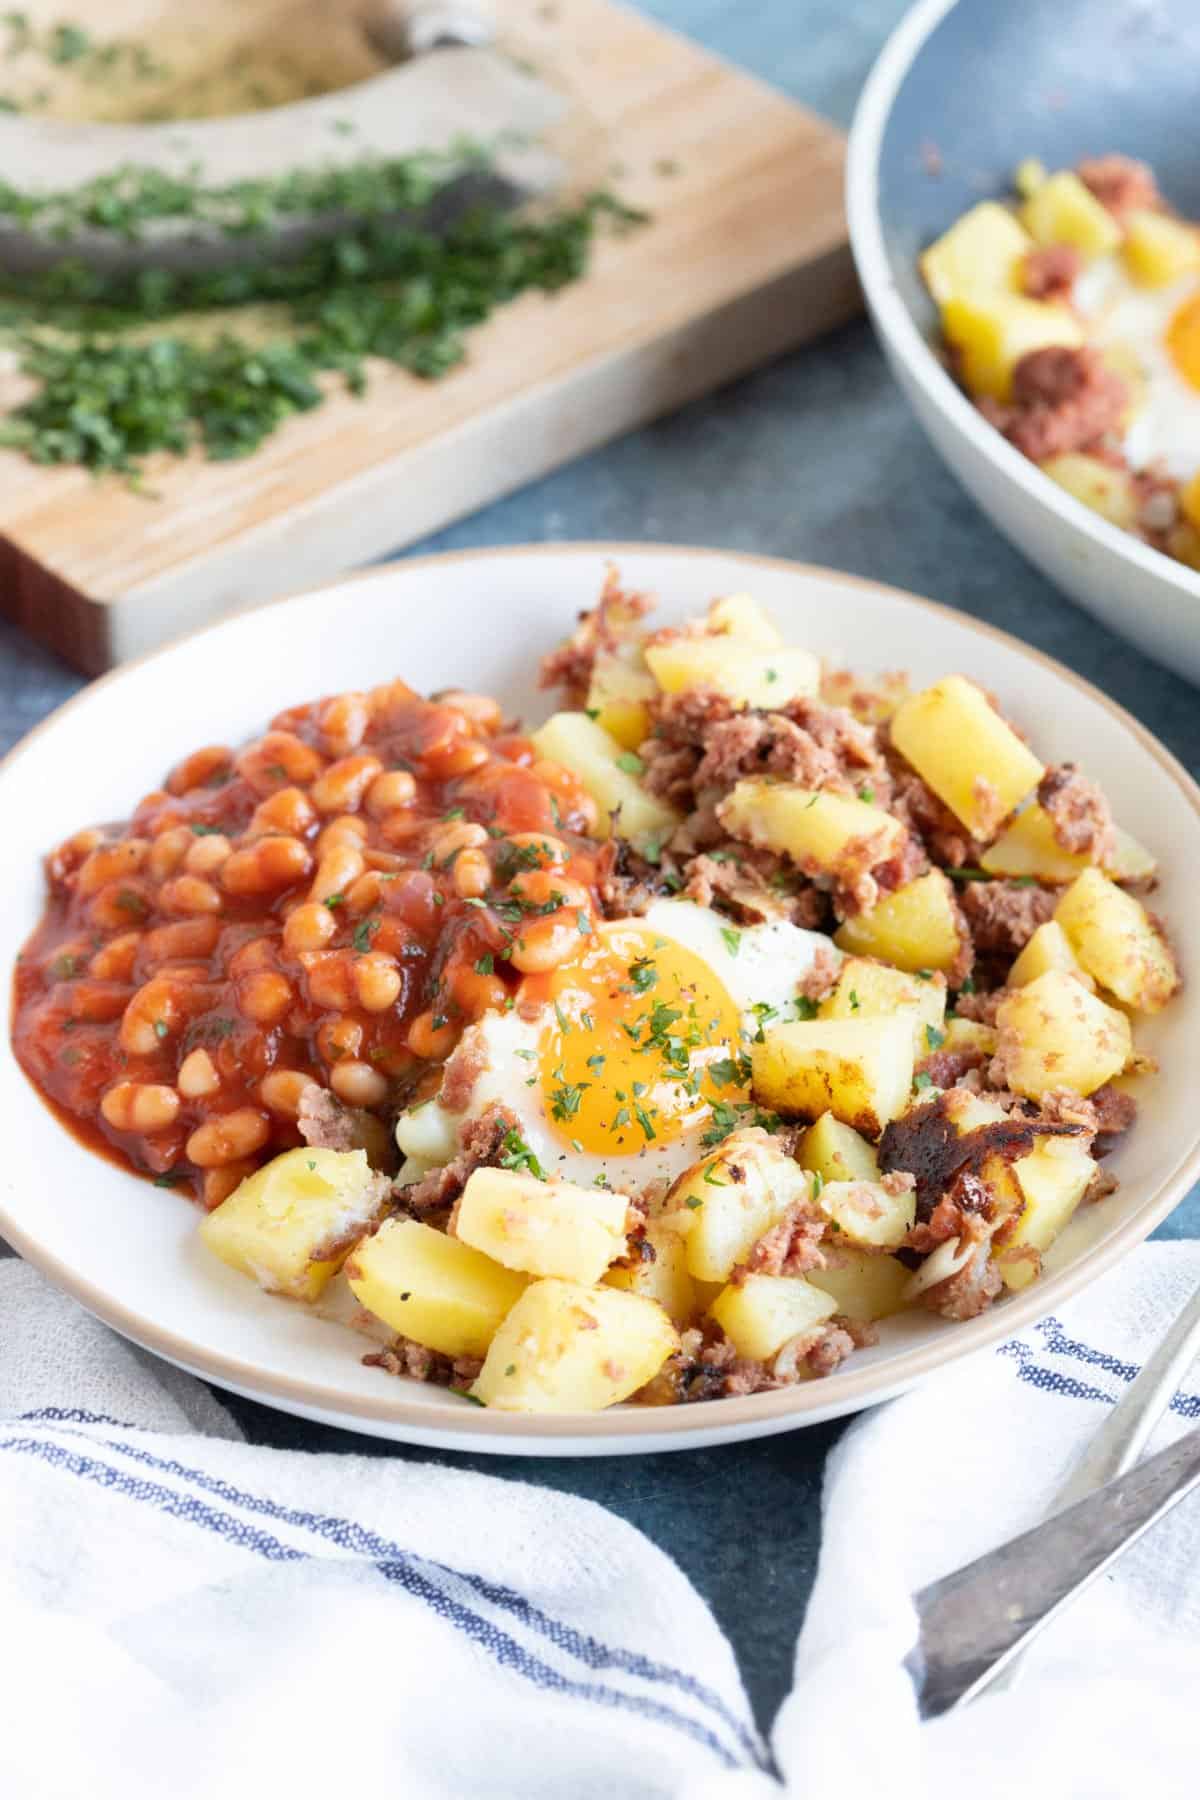 Corned beef hash with fried egg and  baked beans.